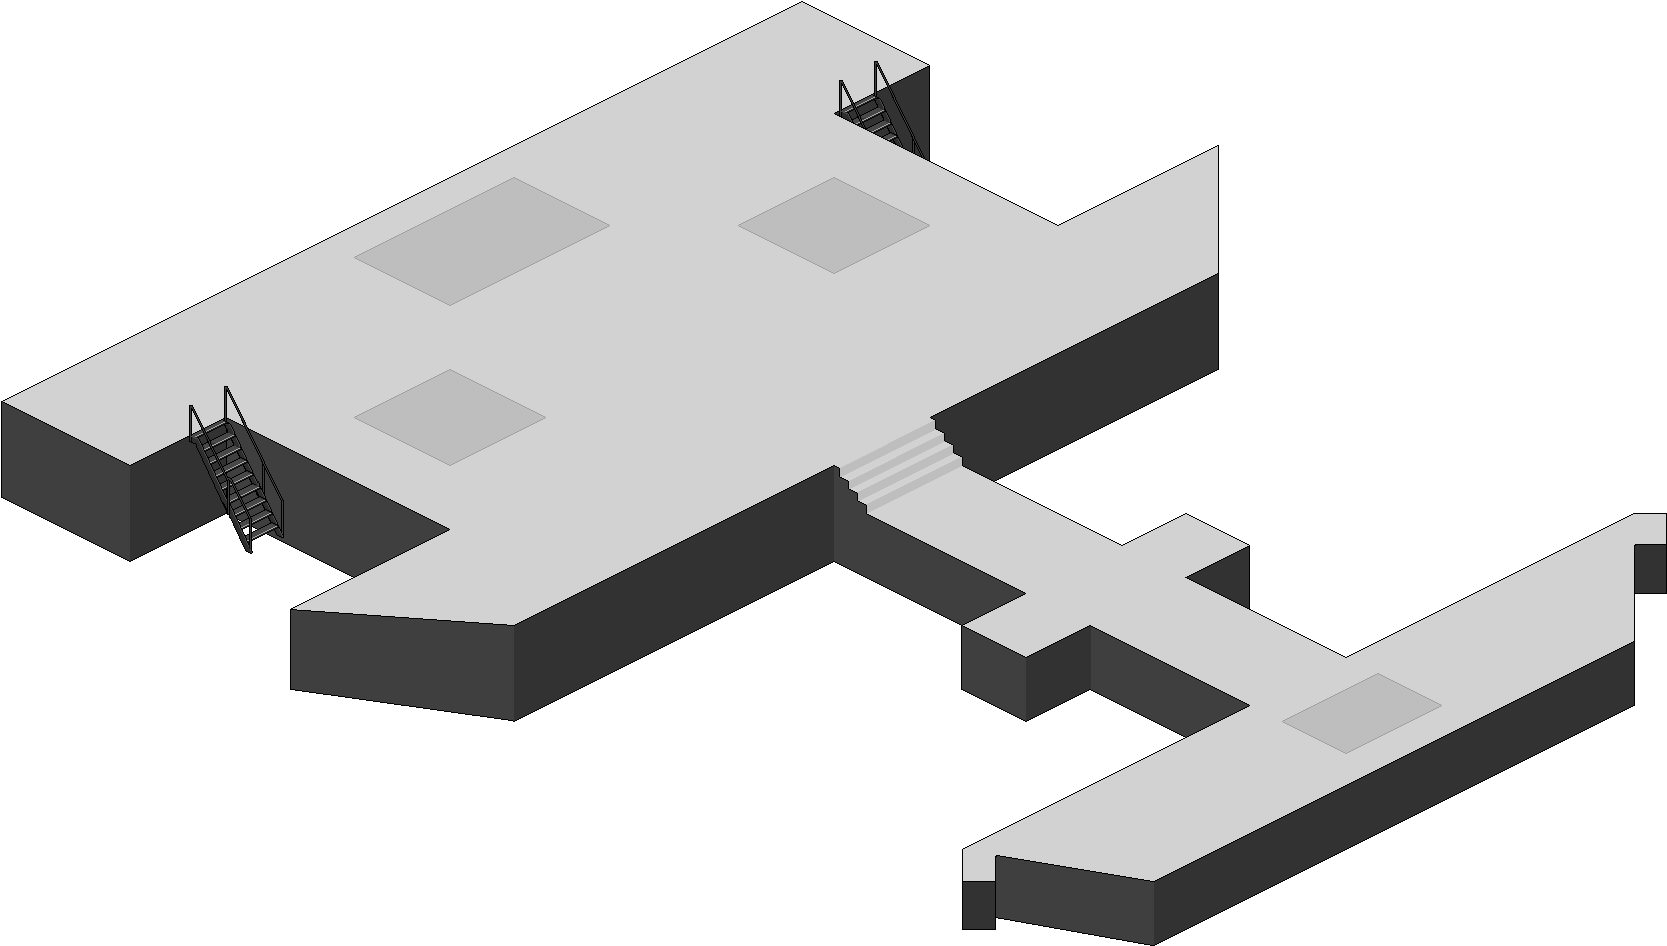 A Grey Rectangular Object With Stairs